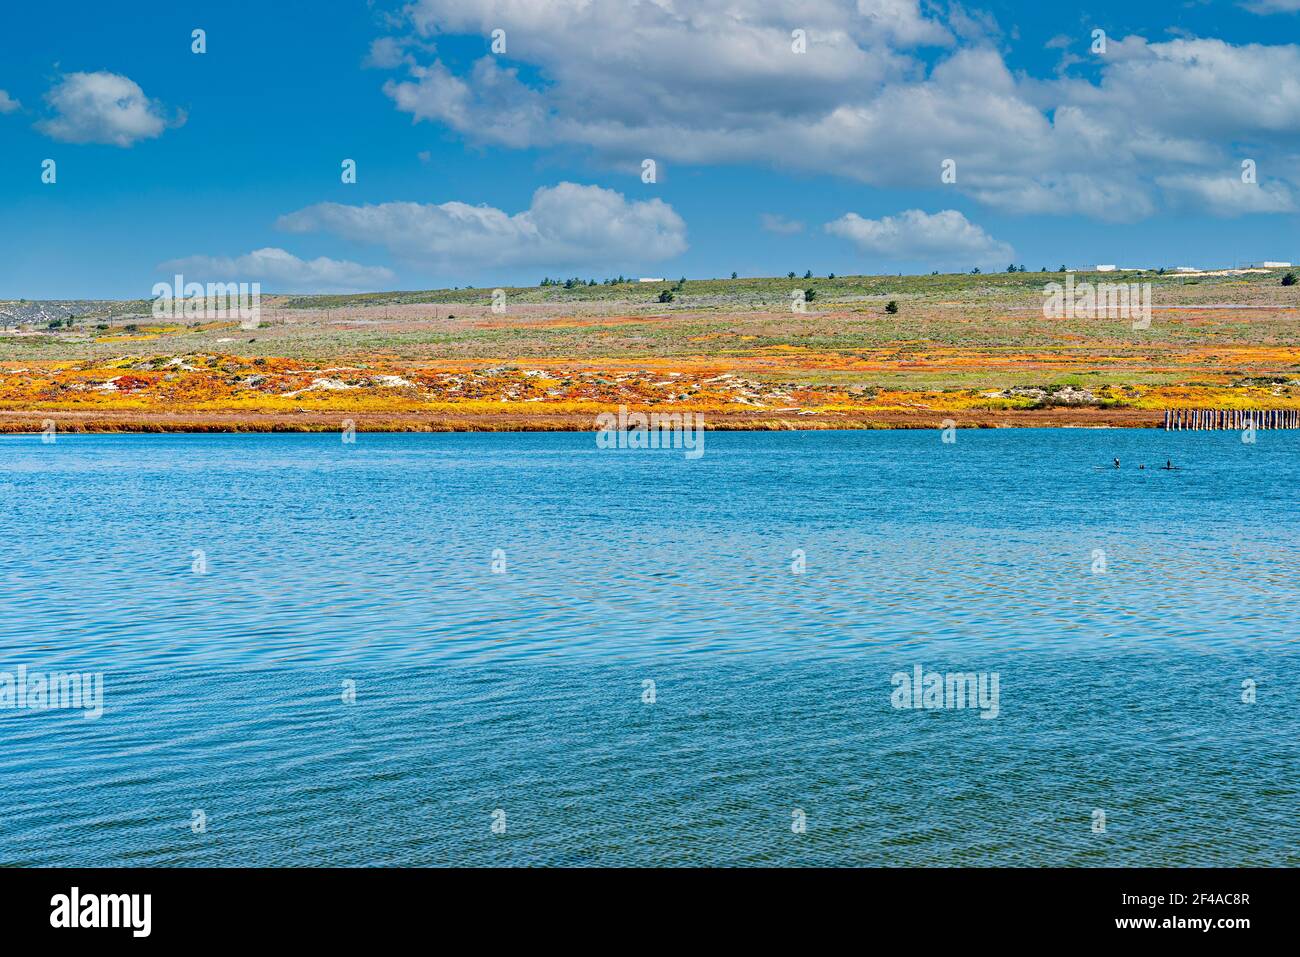 Blue sea gives way to springtime shoreline and hills under blue skies with white fluffy clouds. Stock Photo